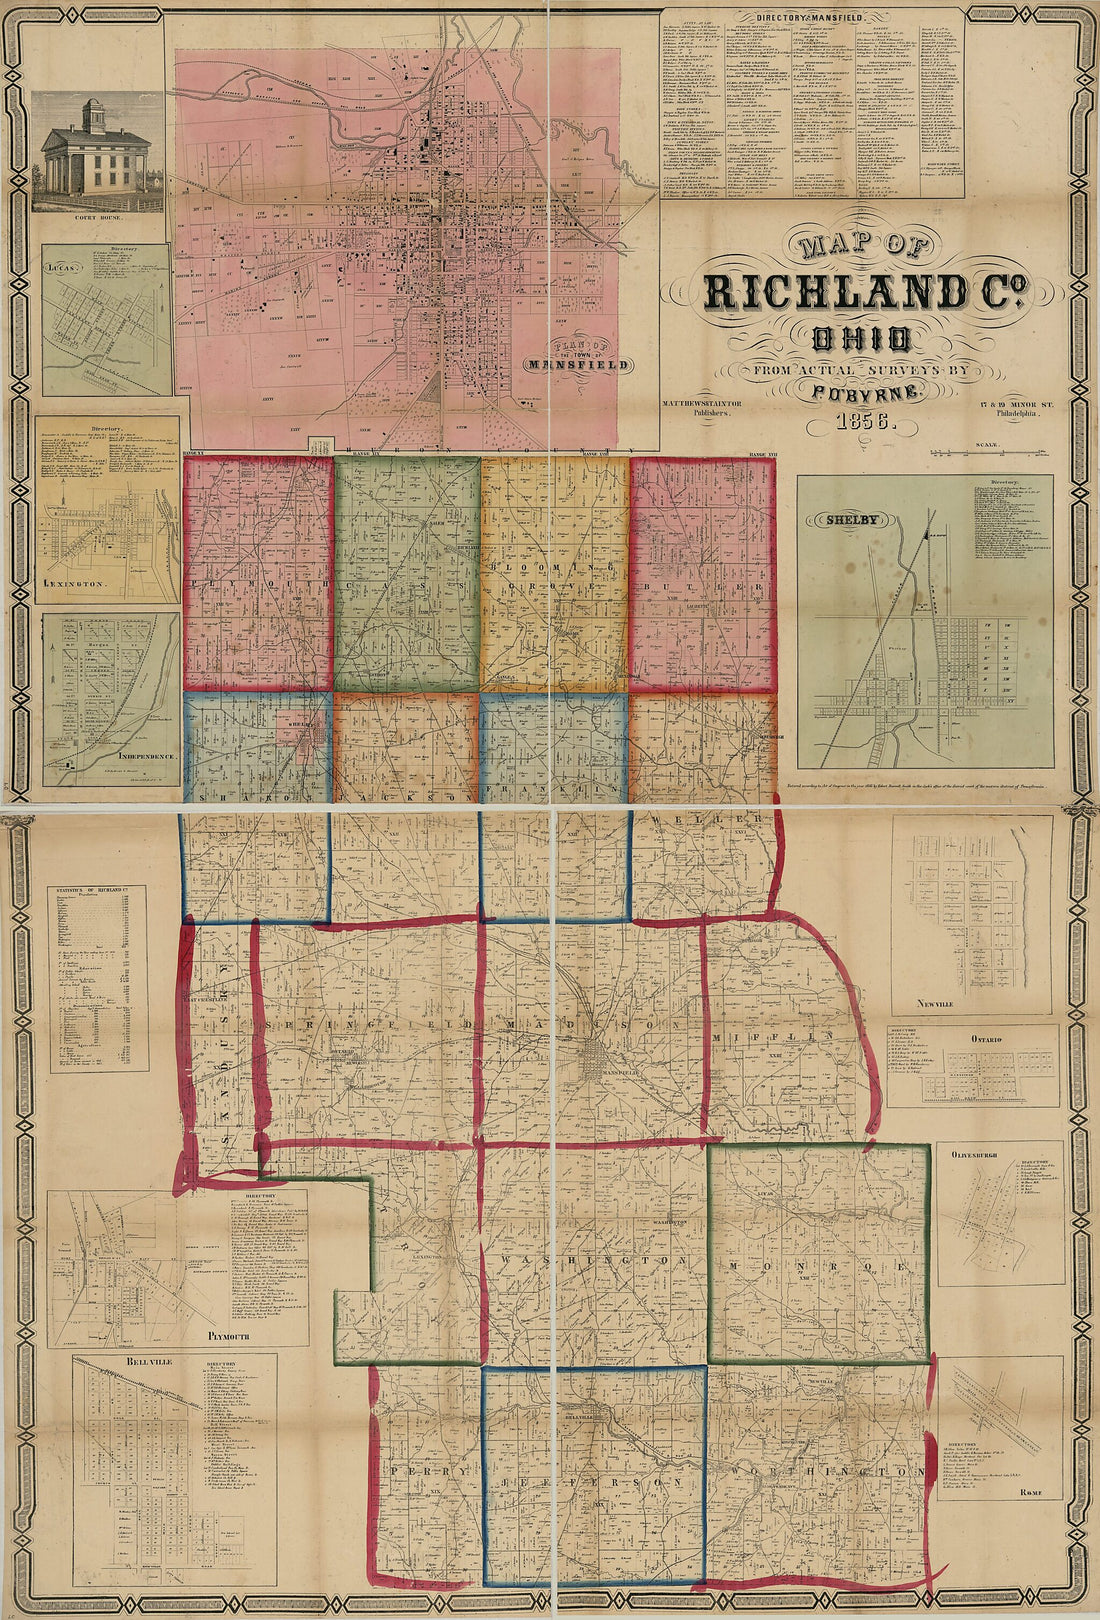 This old map of Map of Richland County, Ohio from 1856 was created by P. O&